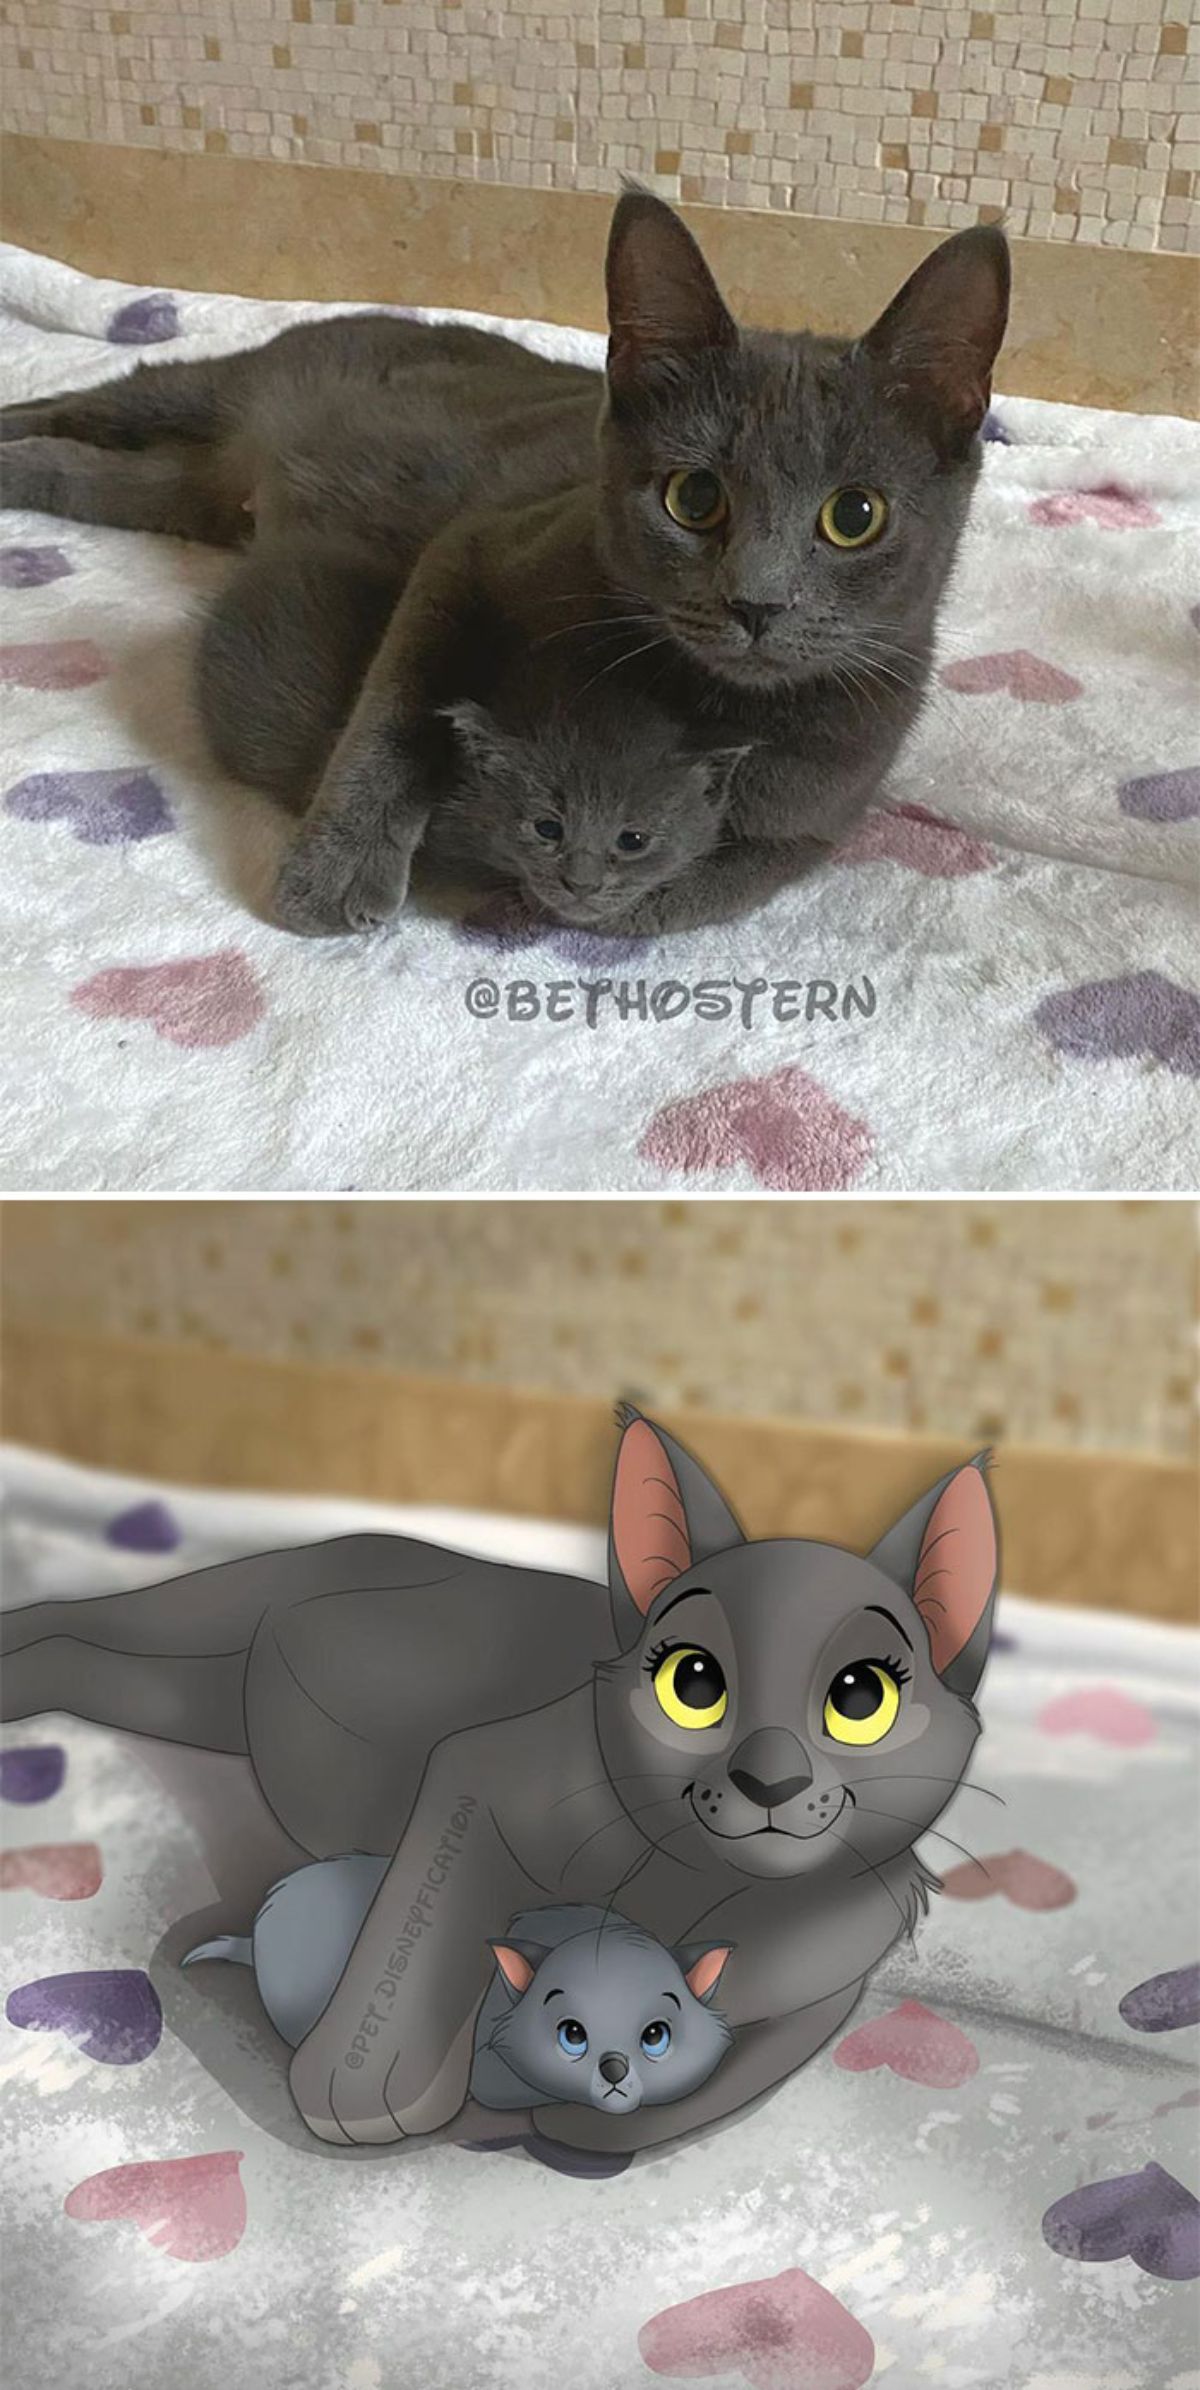 real photo and cartoon image of a grey cat laying on a white blanket cuddling a grey kitten